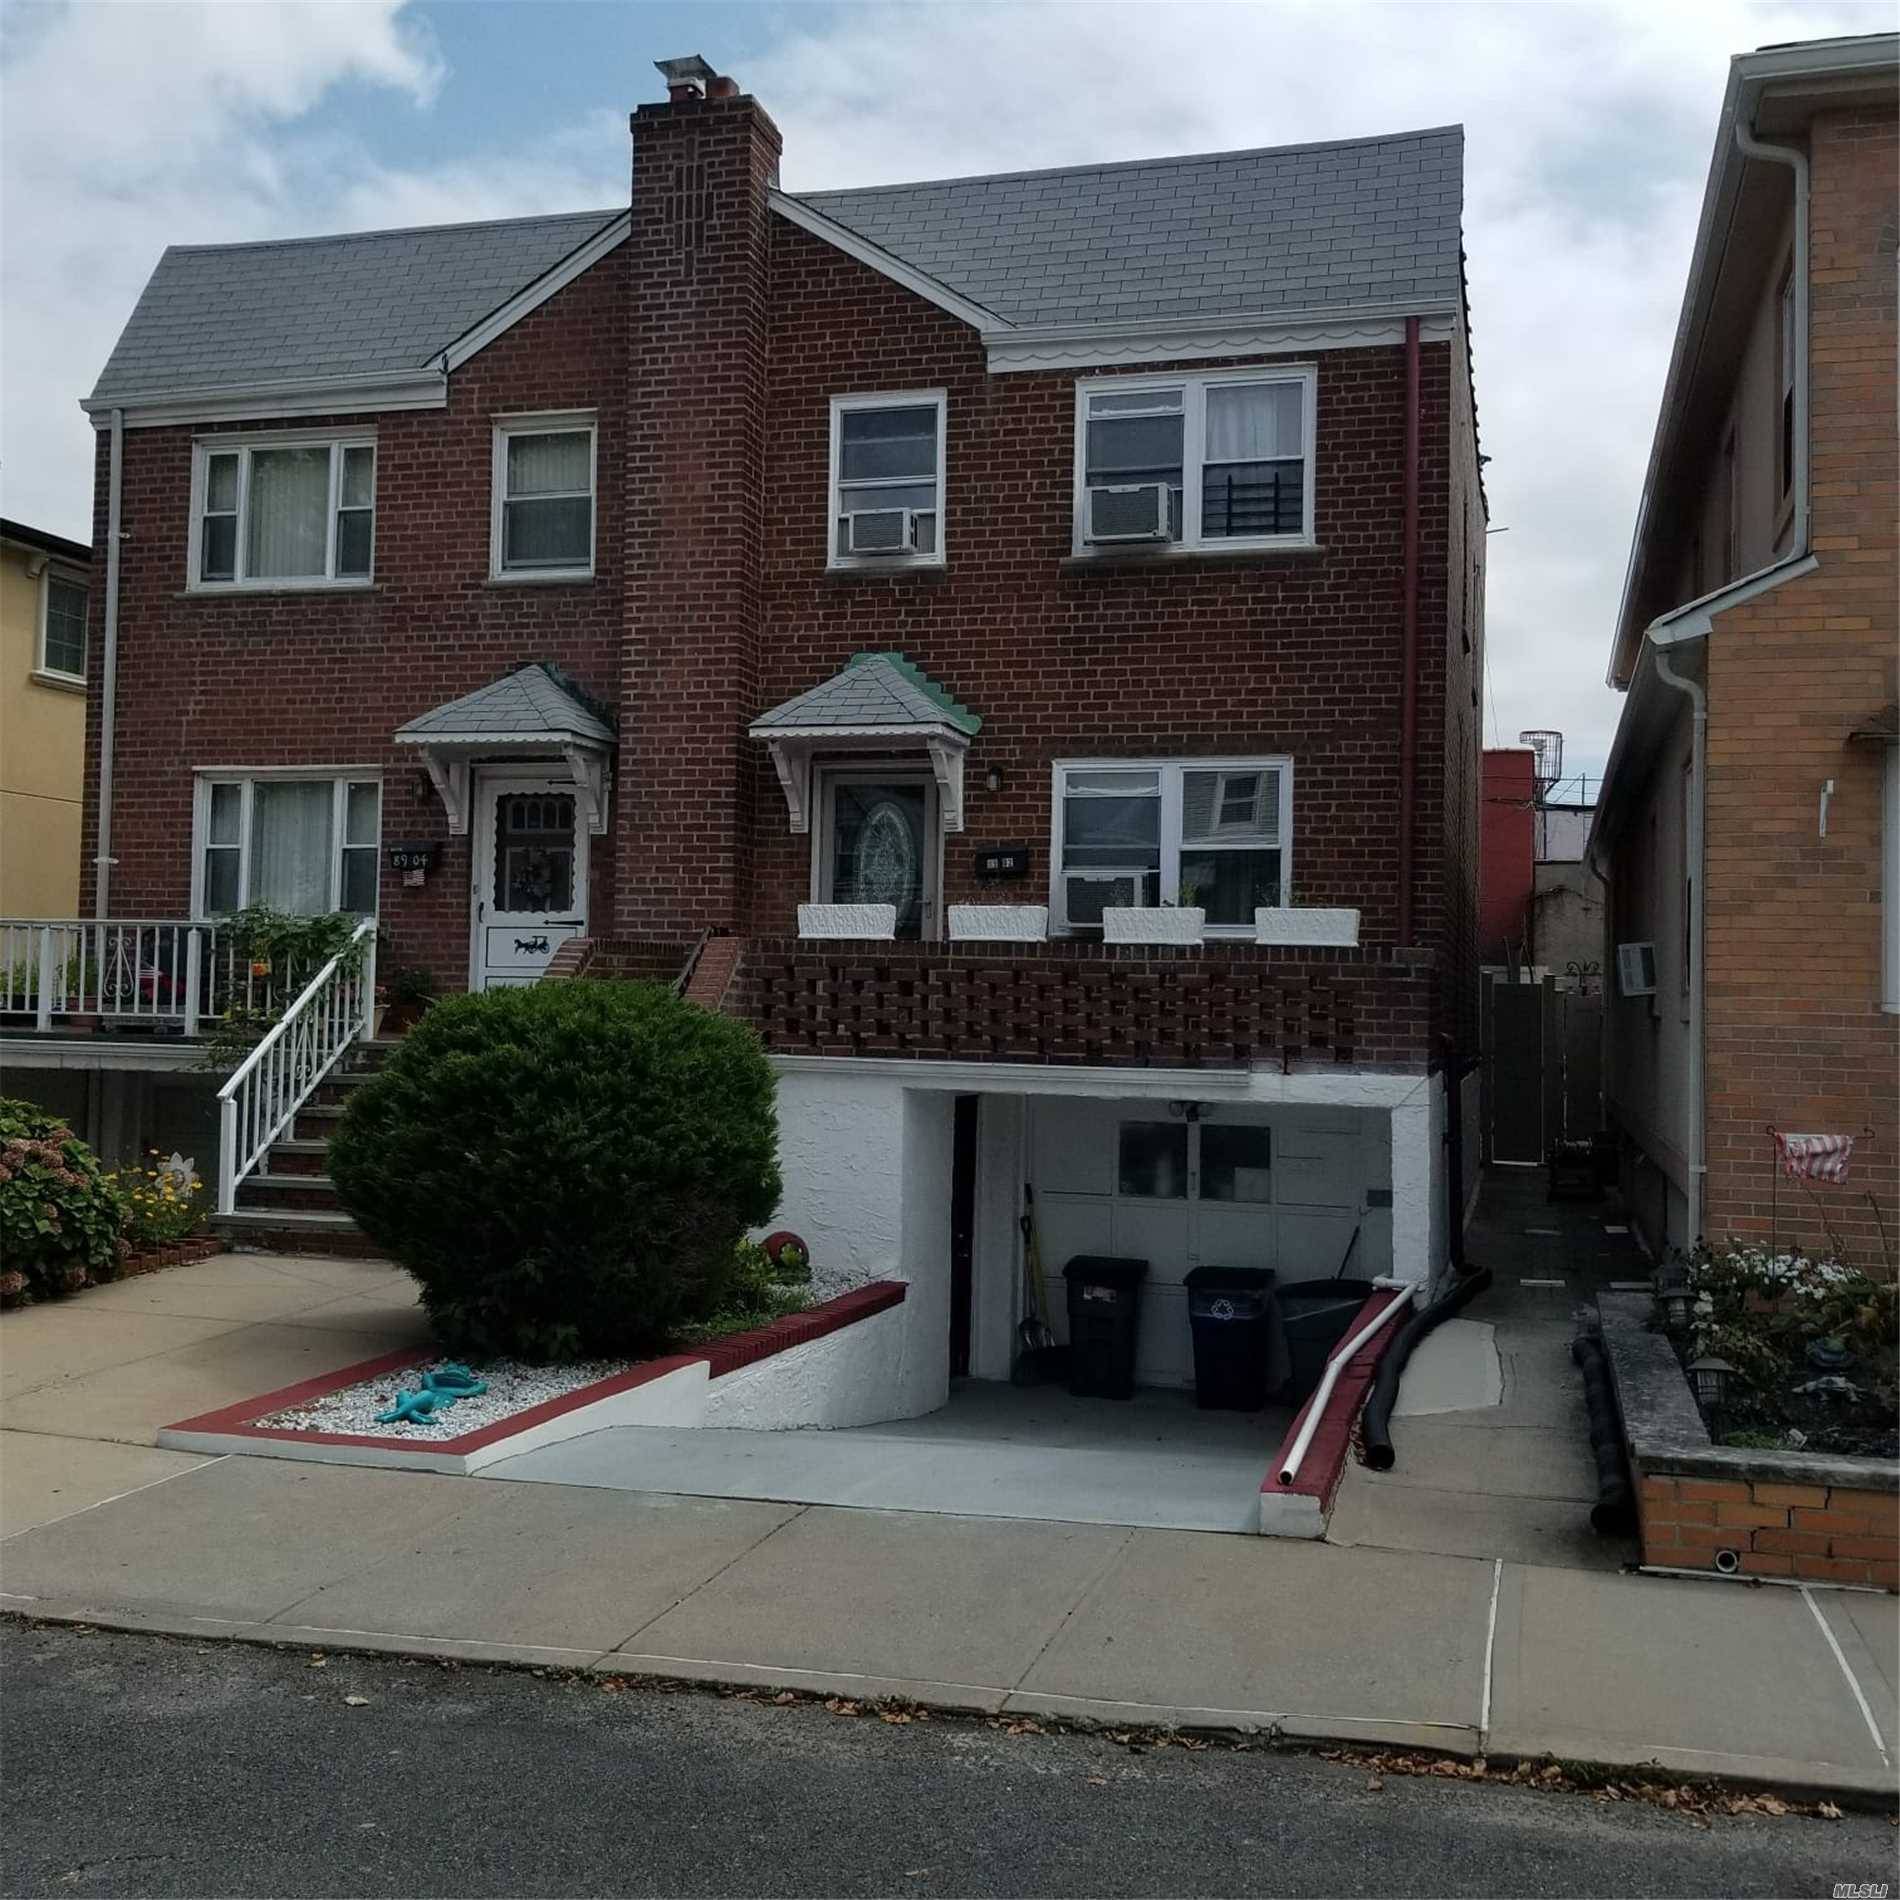 All New 3 Br, Renovated Eik, Bth, Fdr, Lr, Hardwood Floors, Access To Bkyd, New Drainage System All Water To Street.